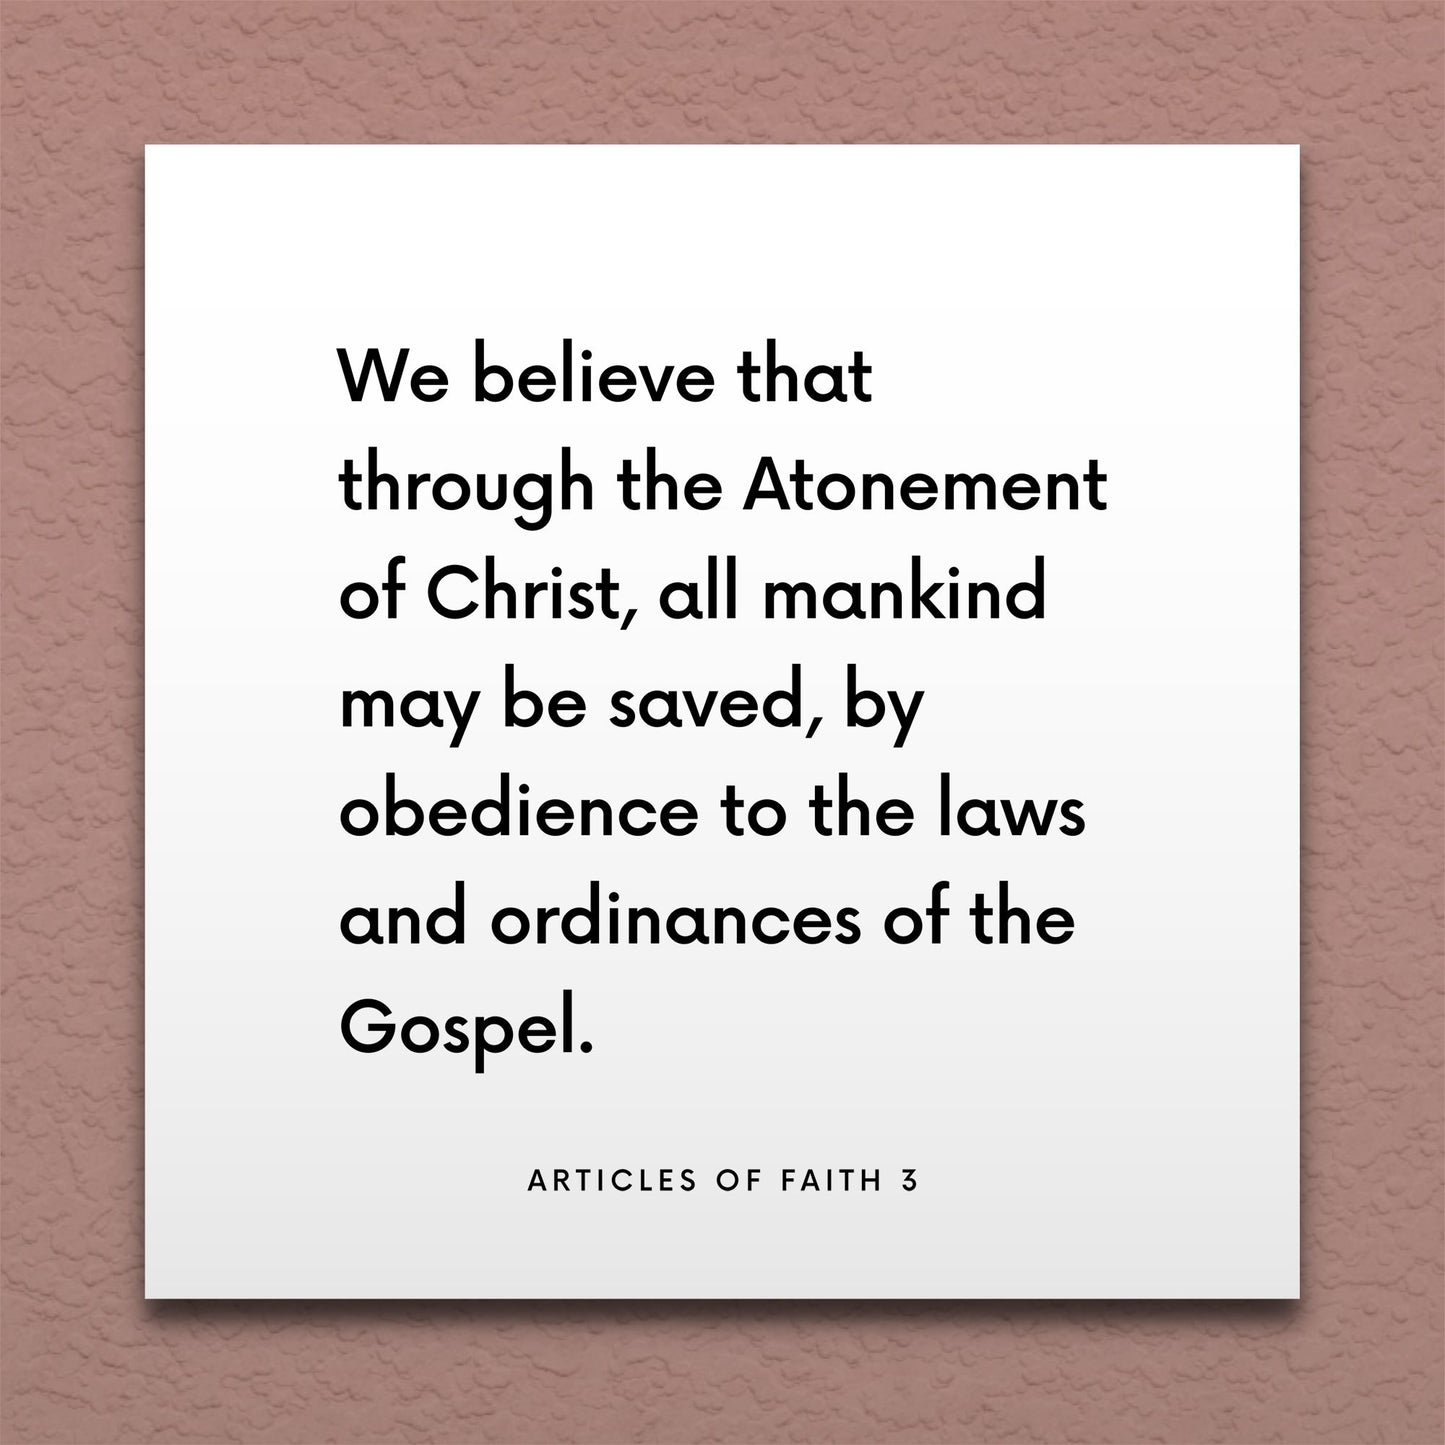 Wall-mounted scripture tile for Articles of Faith 3 - "We believe that through the Atonement of Christ"